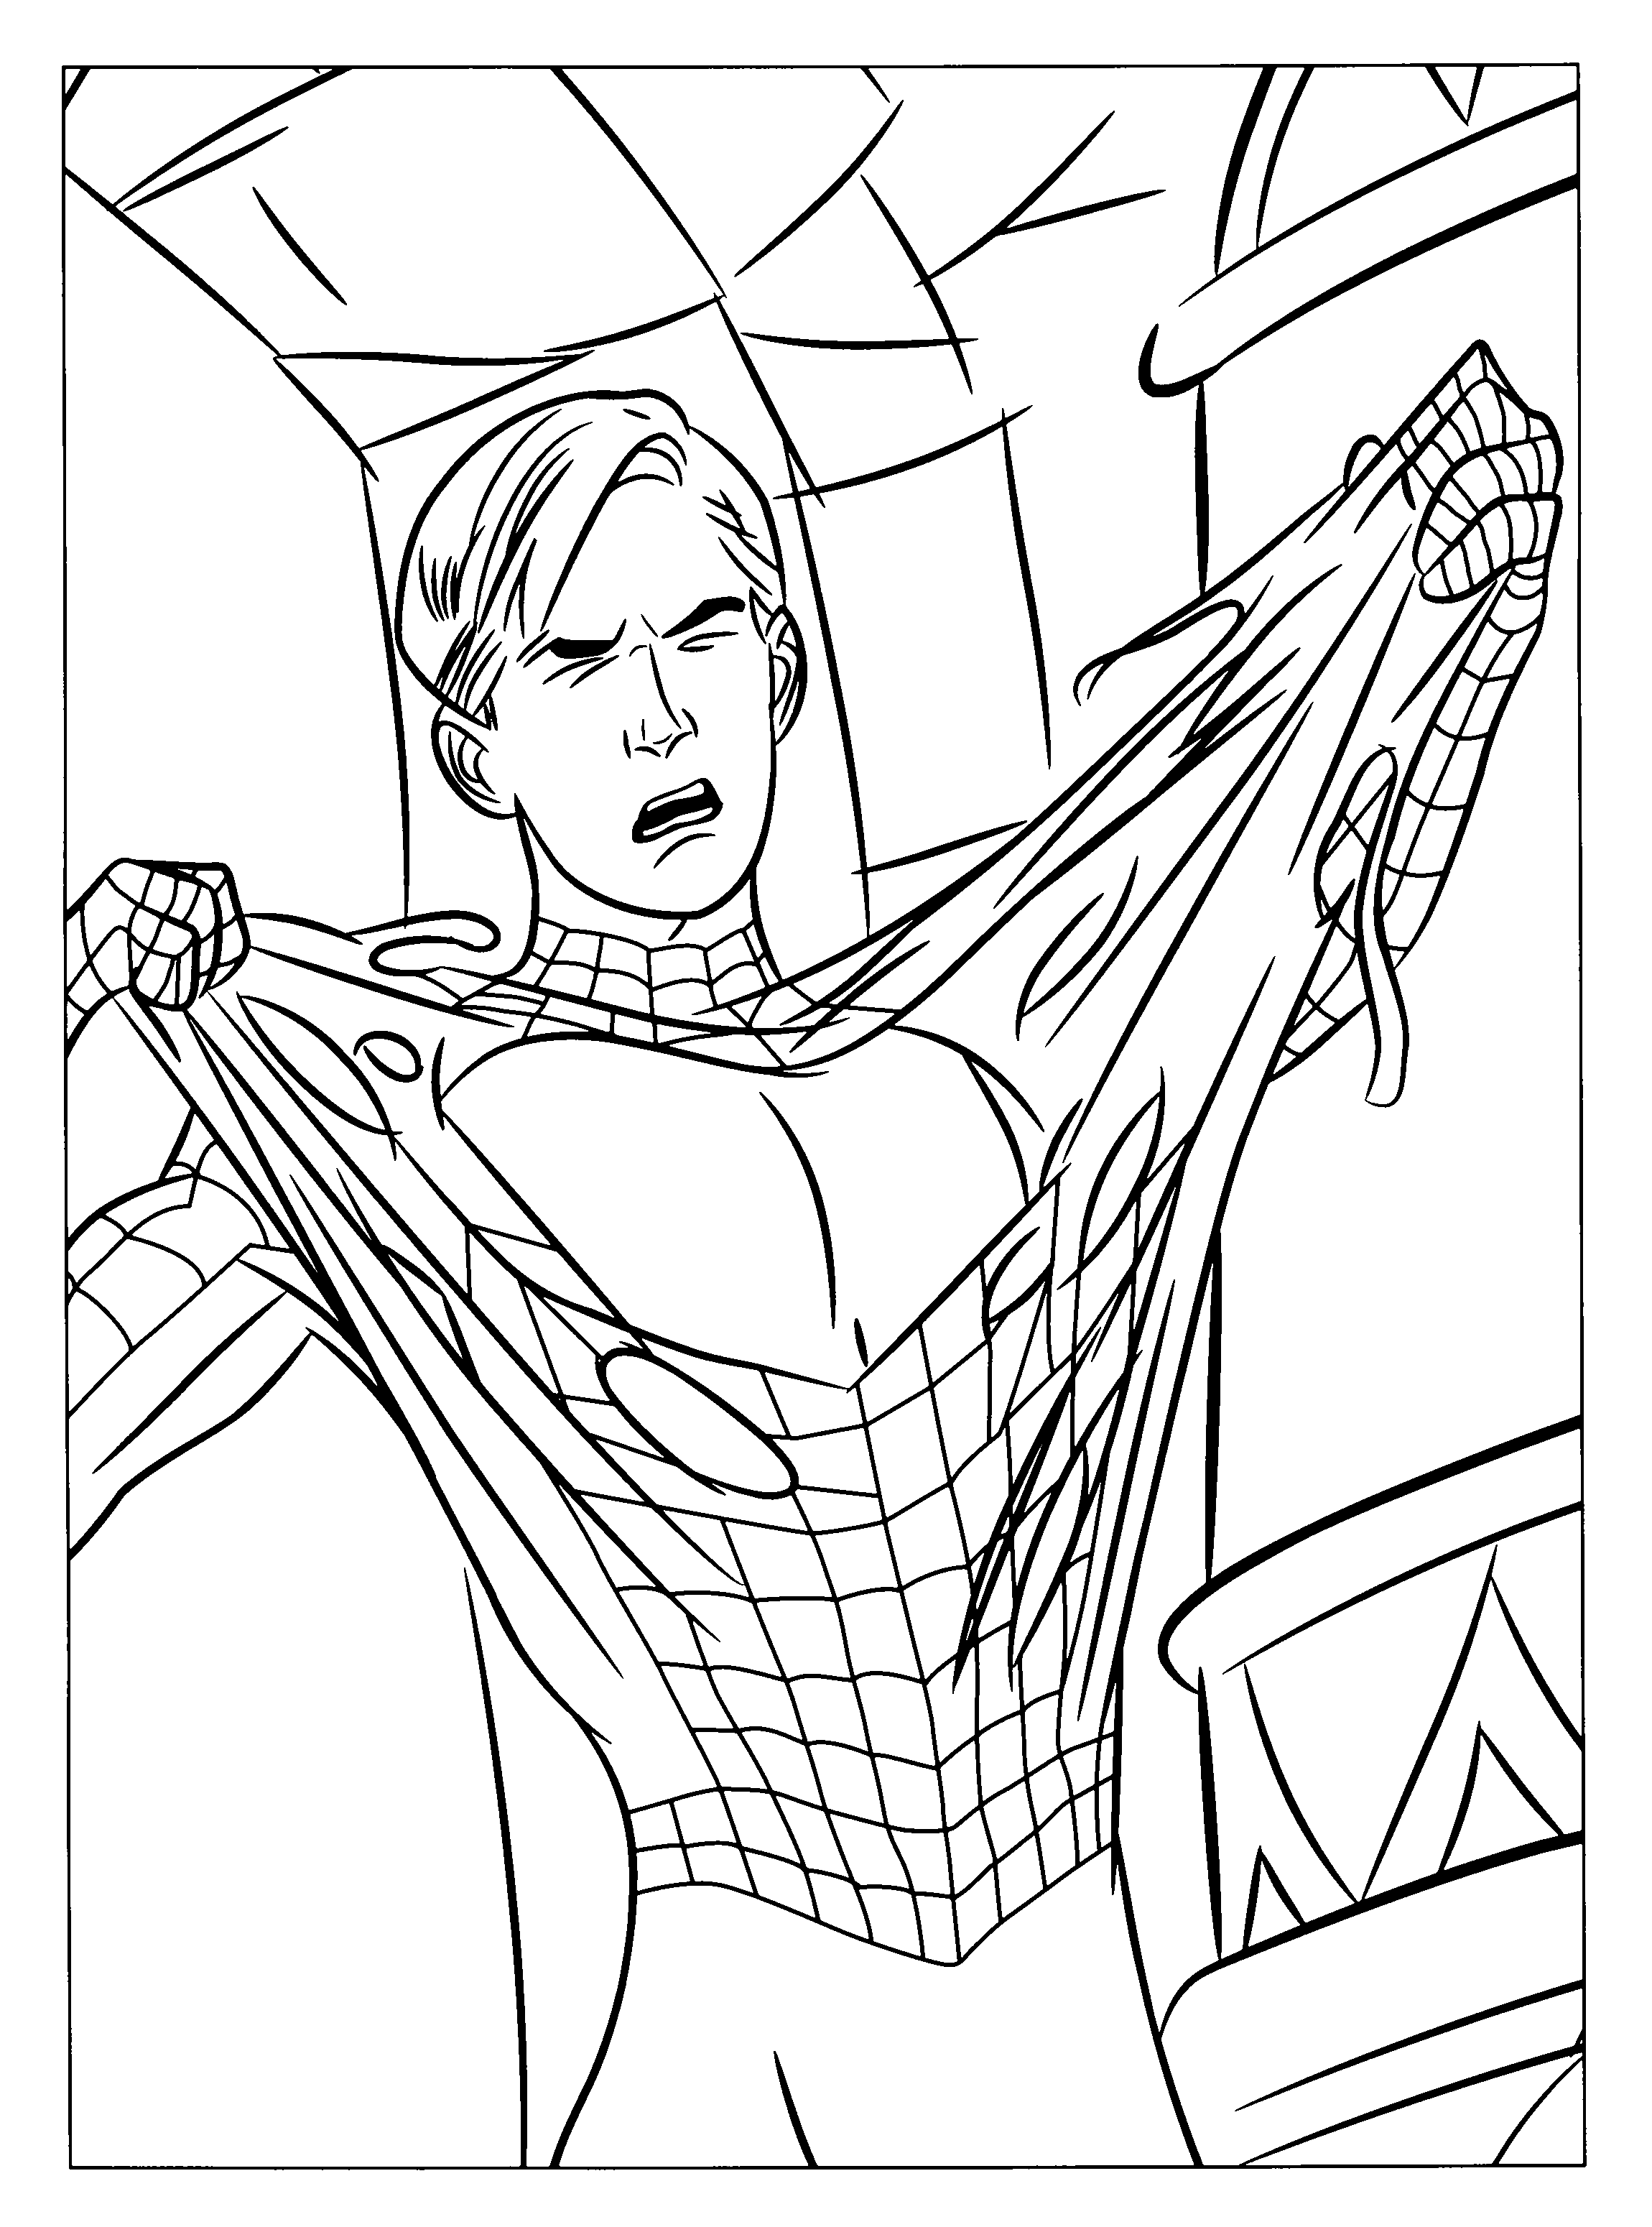 Coloring pages » Spiderman 3 Coloring pages